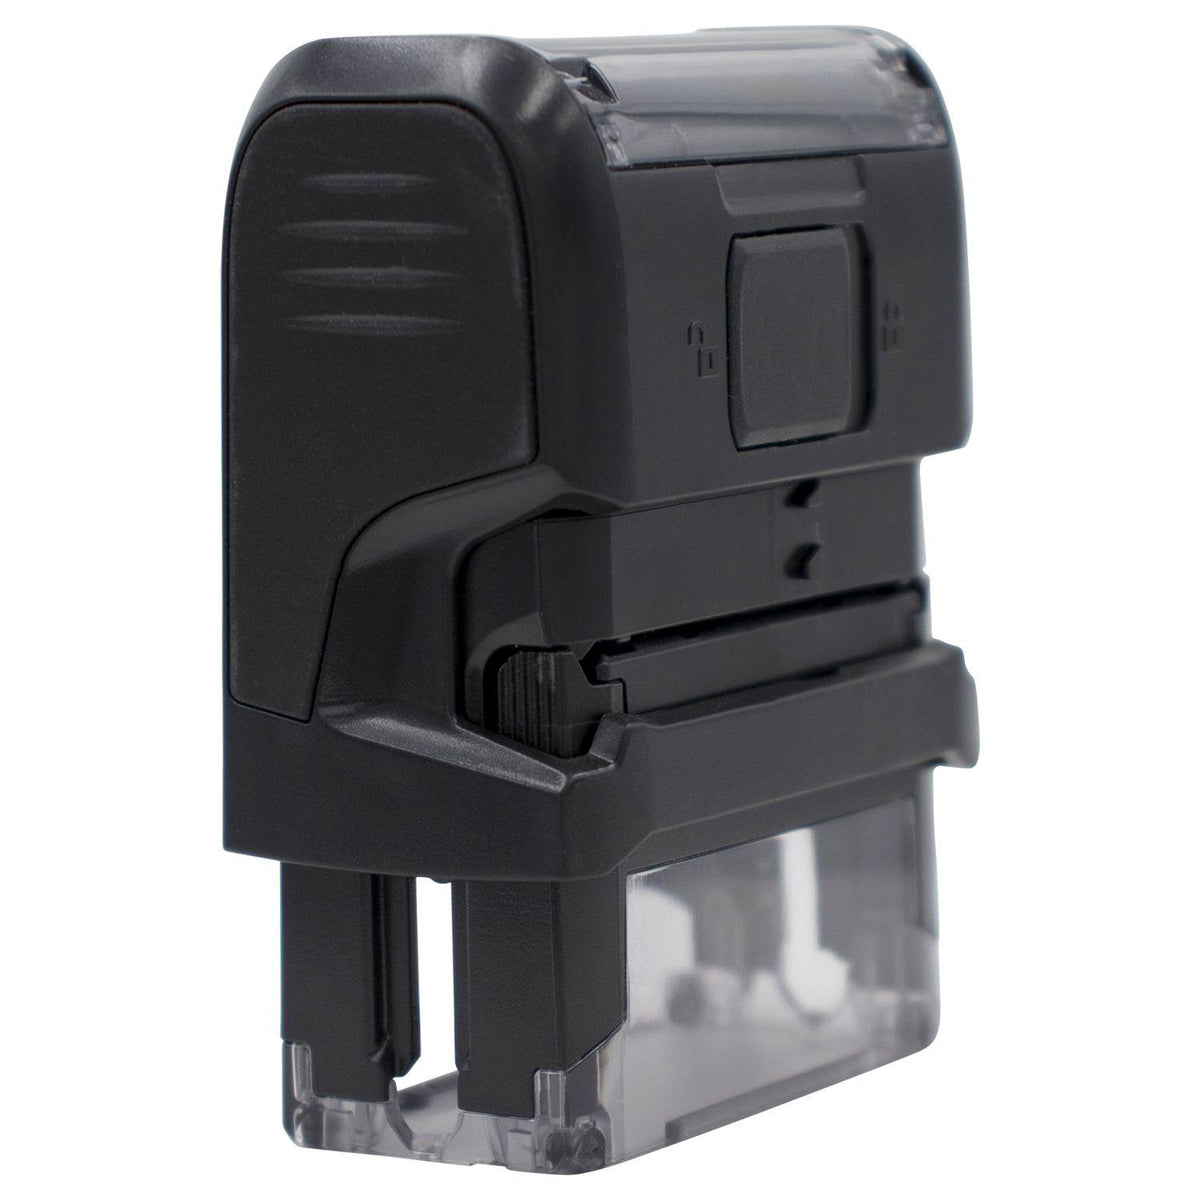 Self Inking Do Not Freeze Stamp - Engineer Seal Stamps - Brand_Trodat, Impression Size_Small, Stamp Type_Self-Inking Stamp, Type of Use_Medical Office